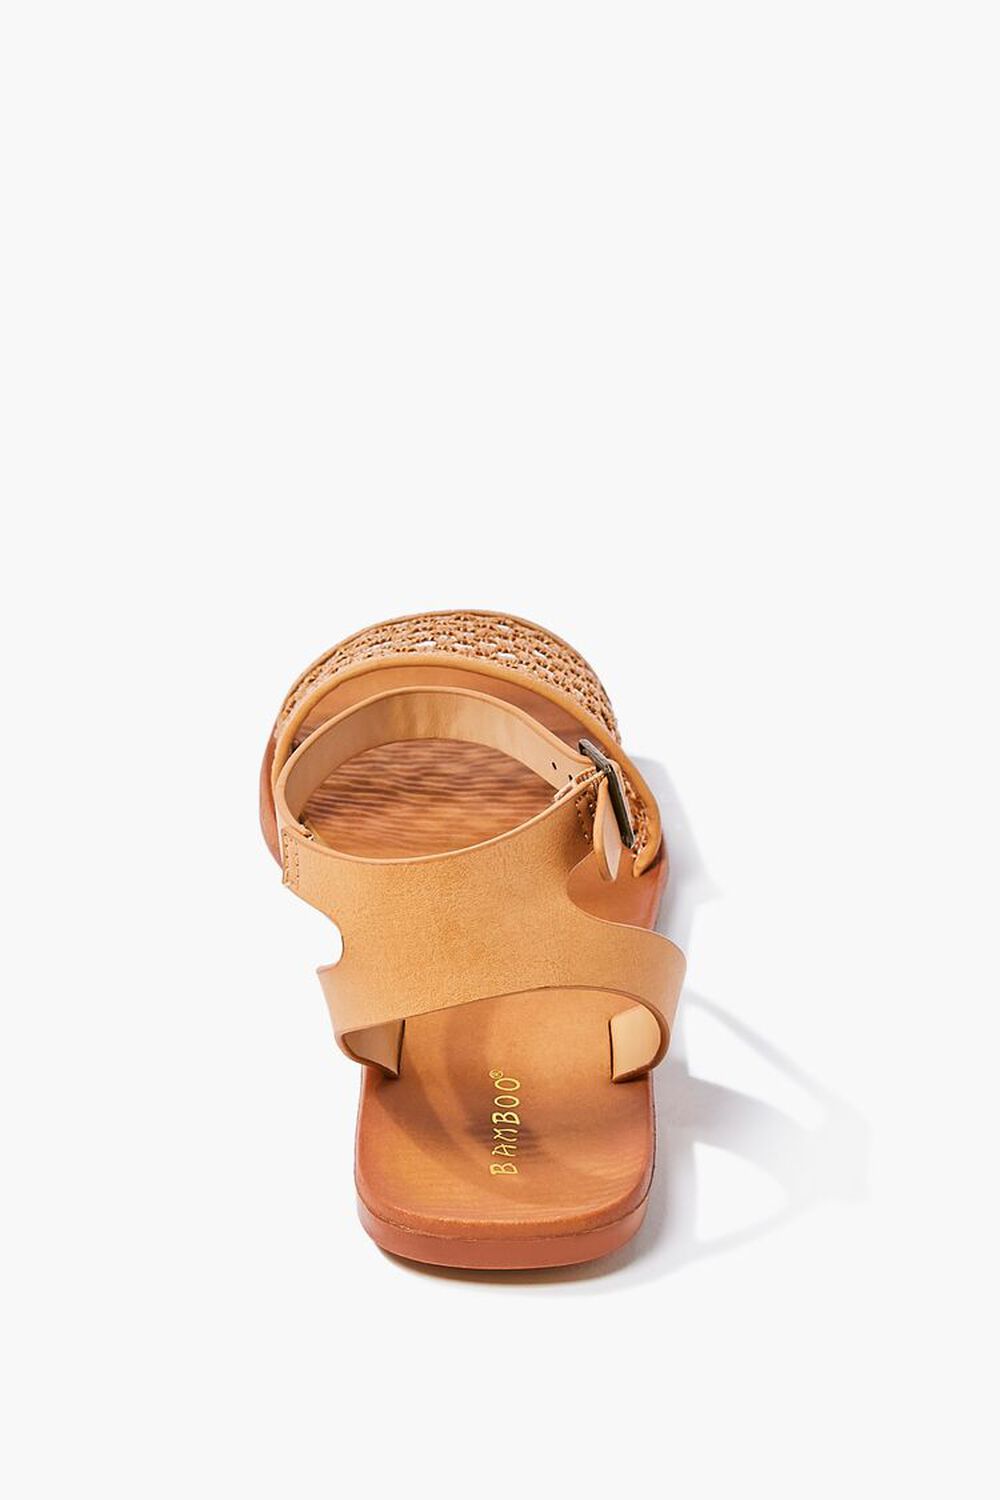 NATURAL Faux Leather Buckled Sandals, image 3